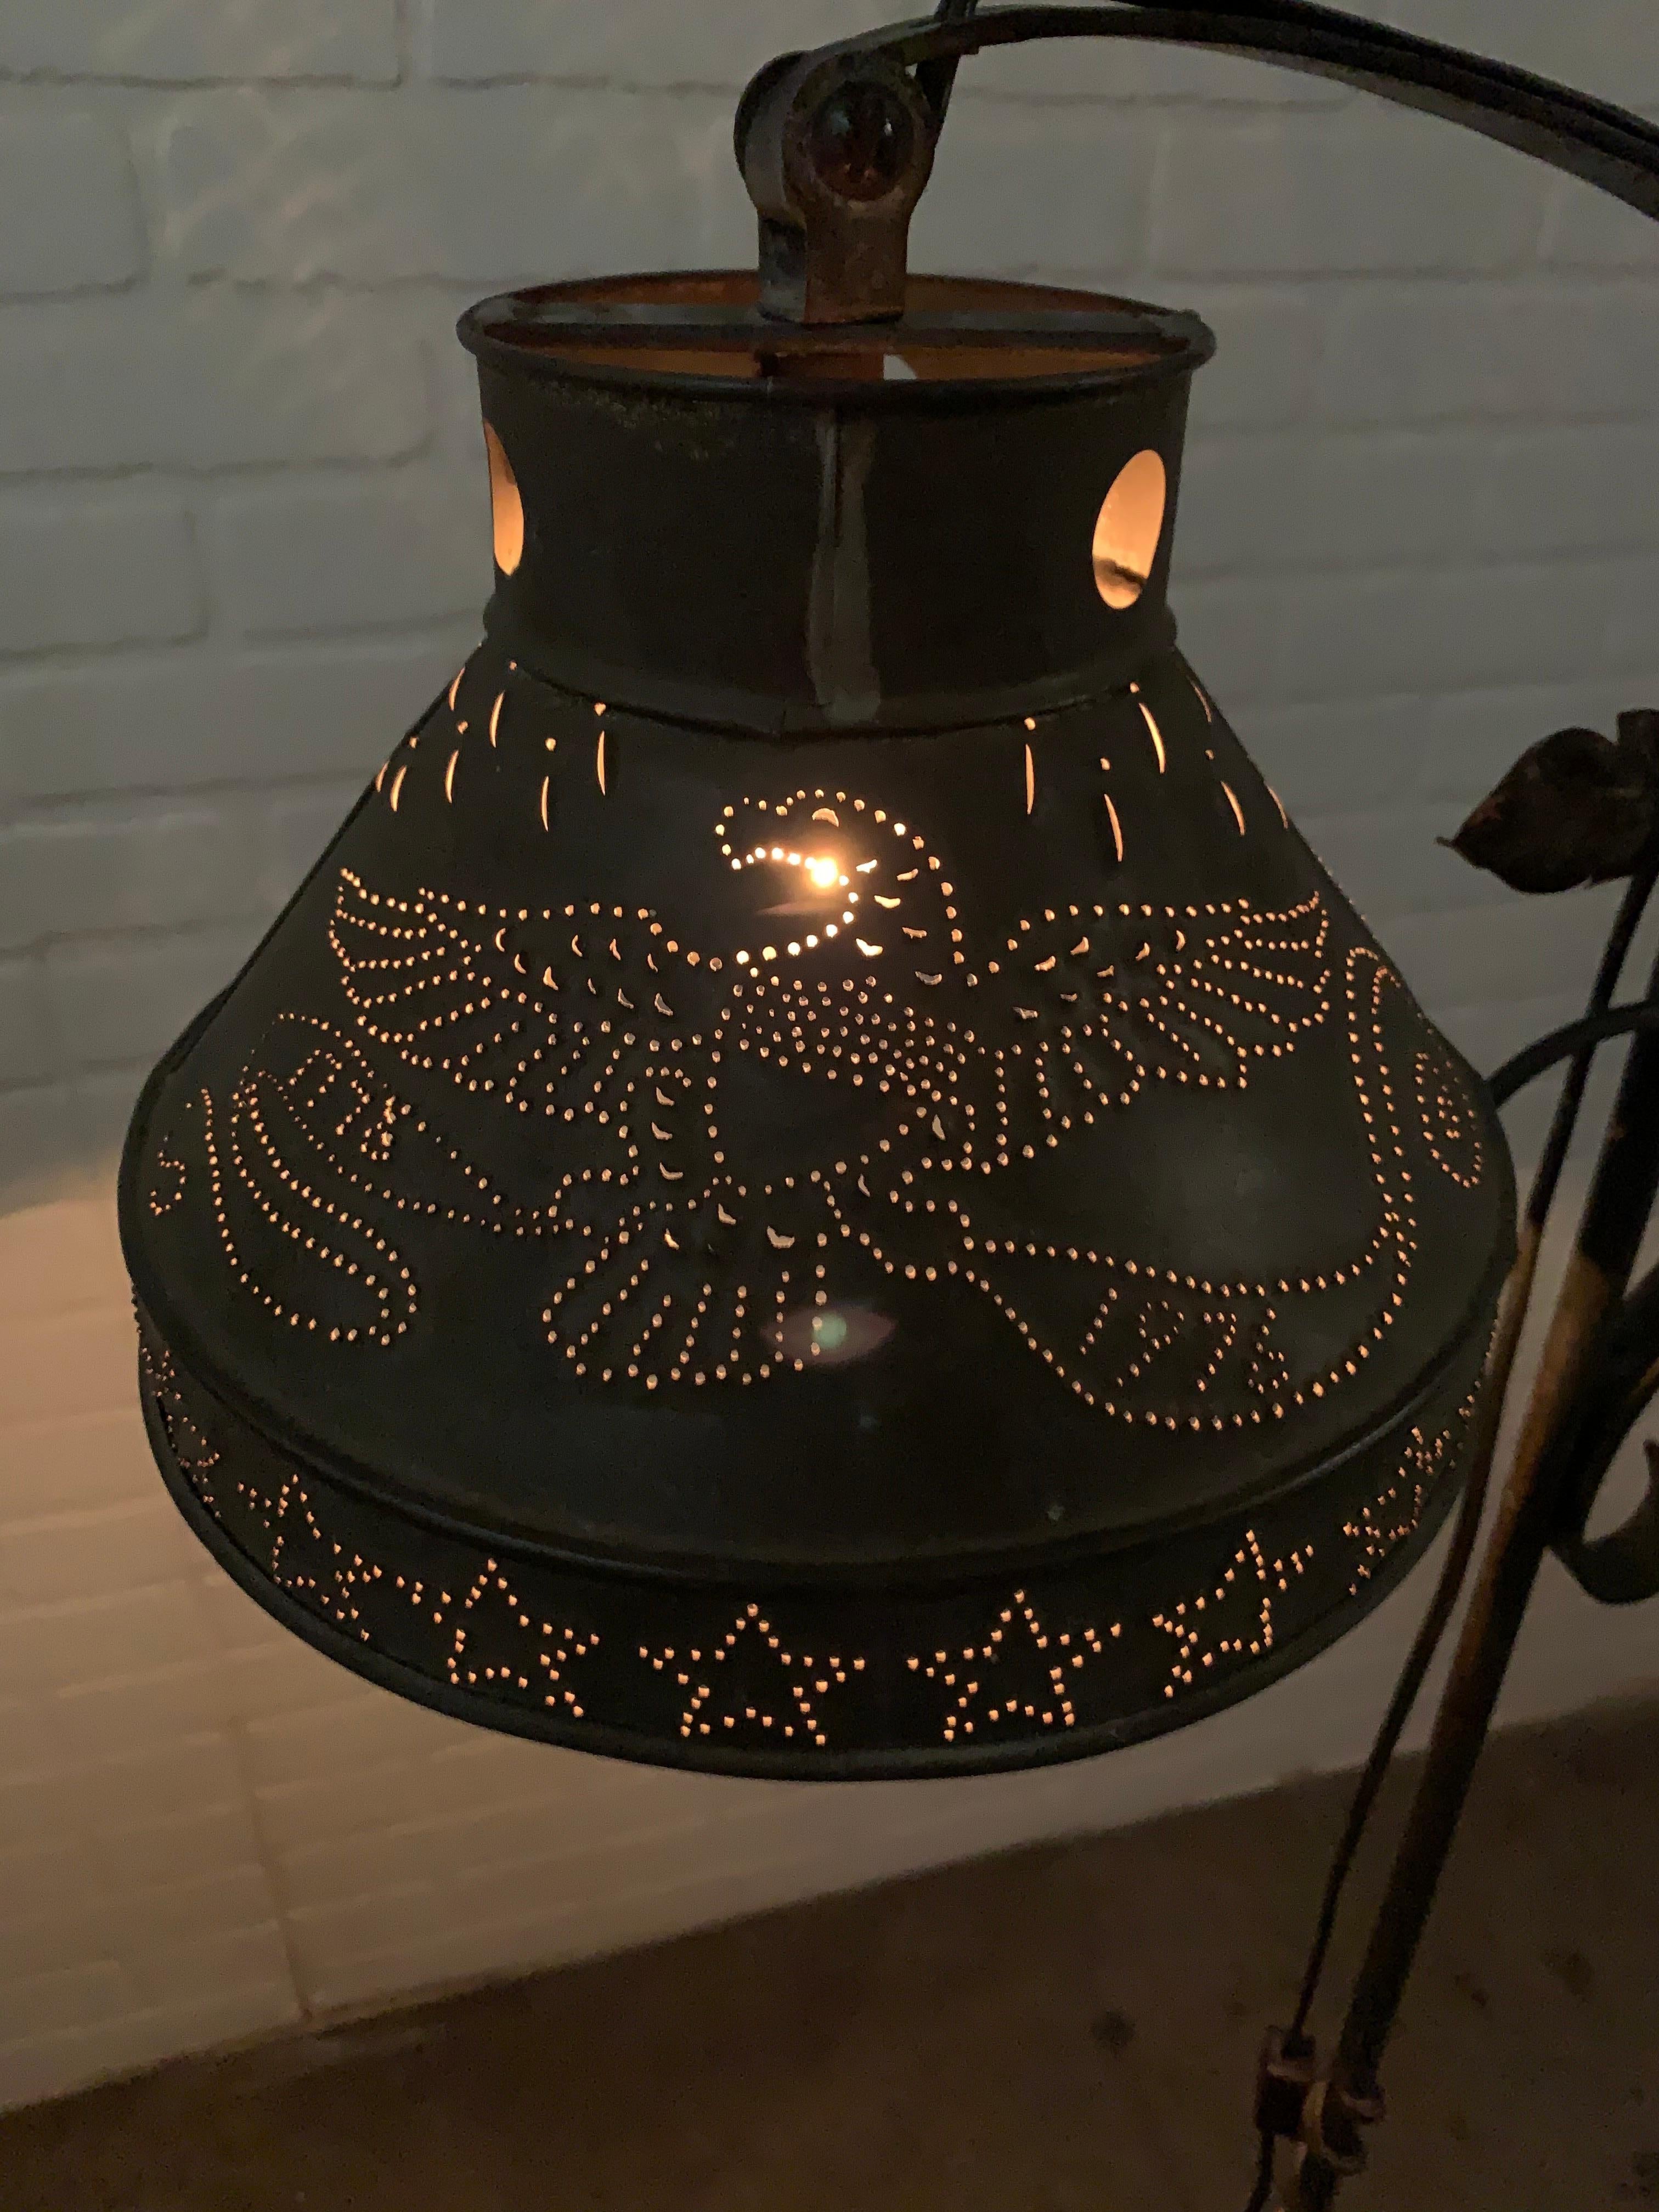 Forged iron bridge lamp with images of Americas Bald Eagle and George Washington punched in the tin shade to celebrate 200 years of freedom 1776-1976.